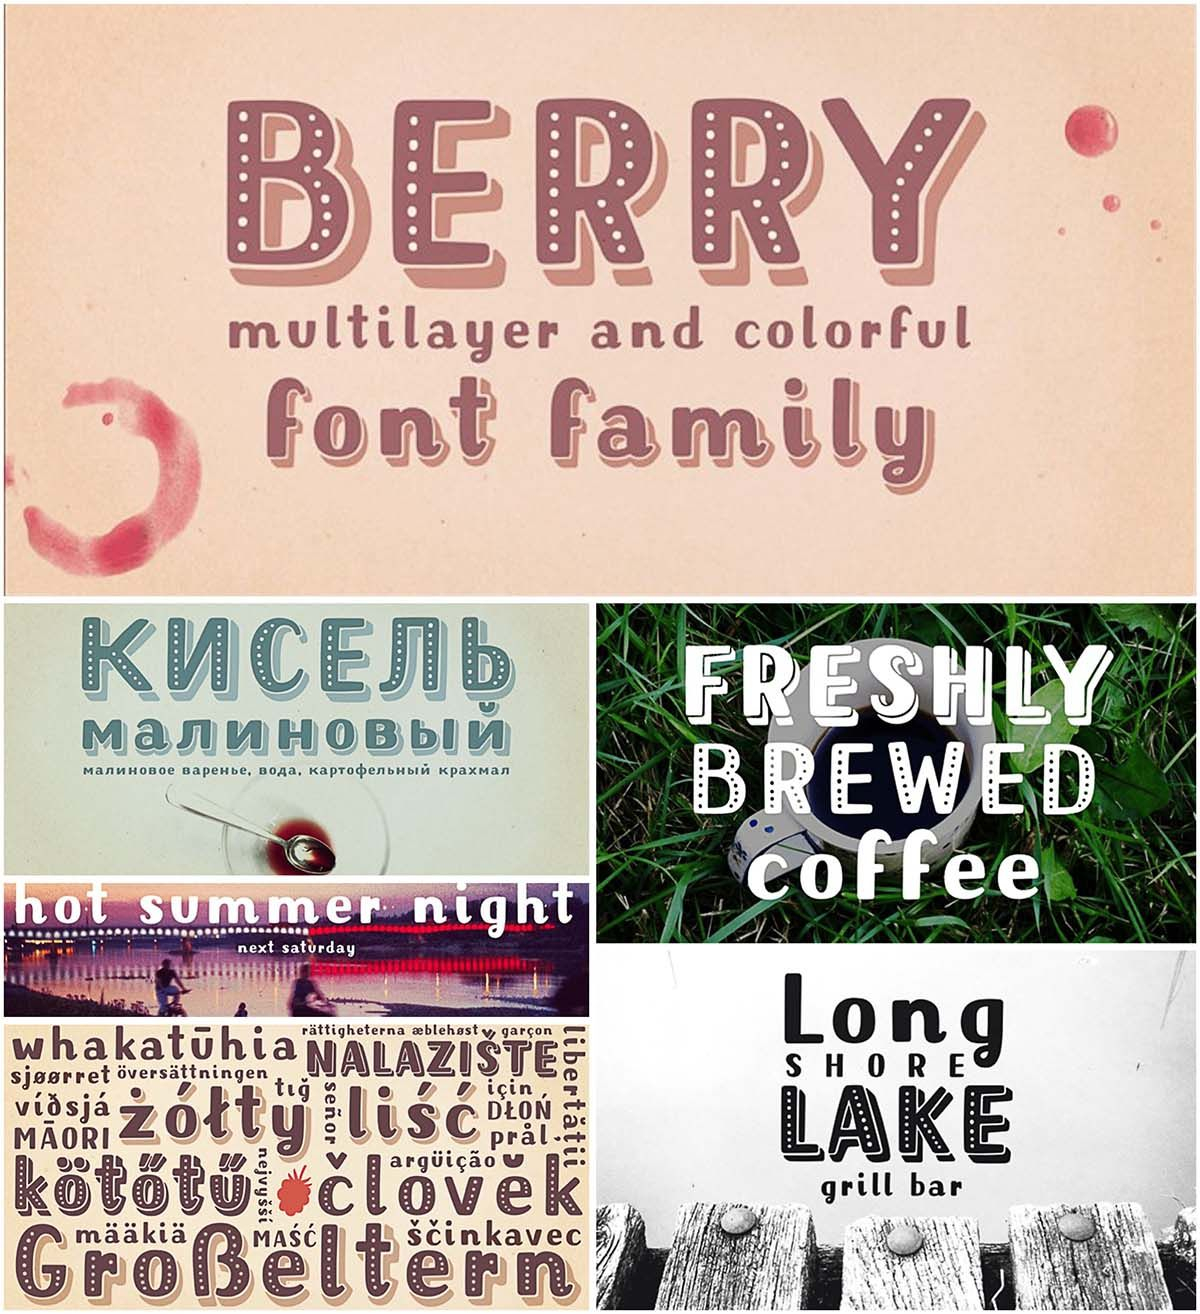 Mrs Berry Font Family With Cyrillic Typeface | Font Family